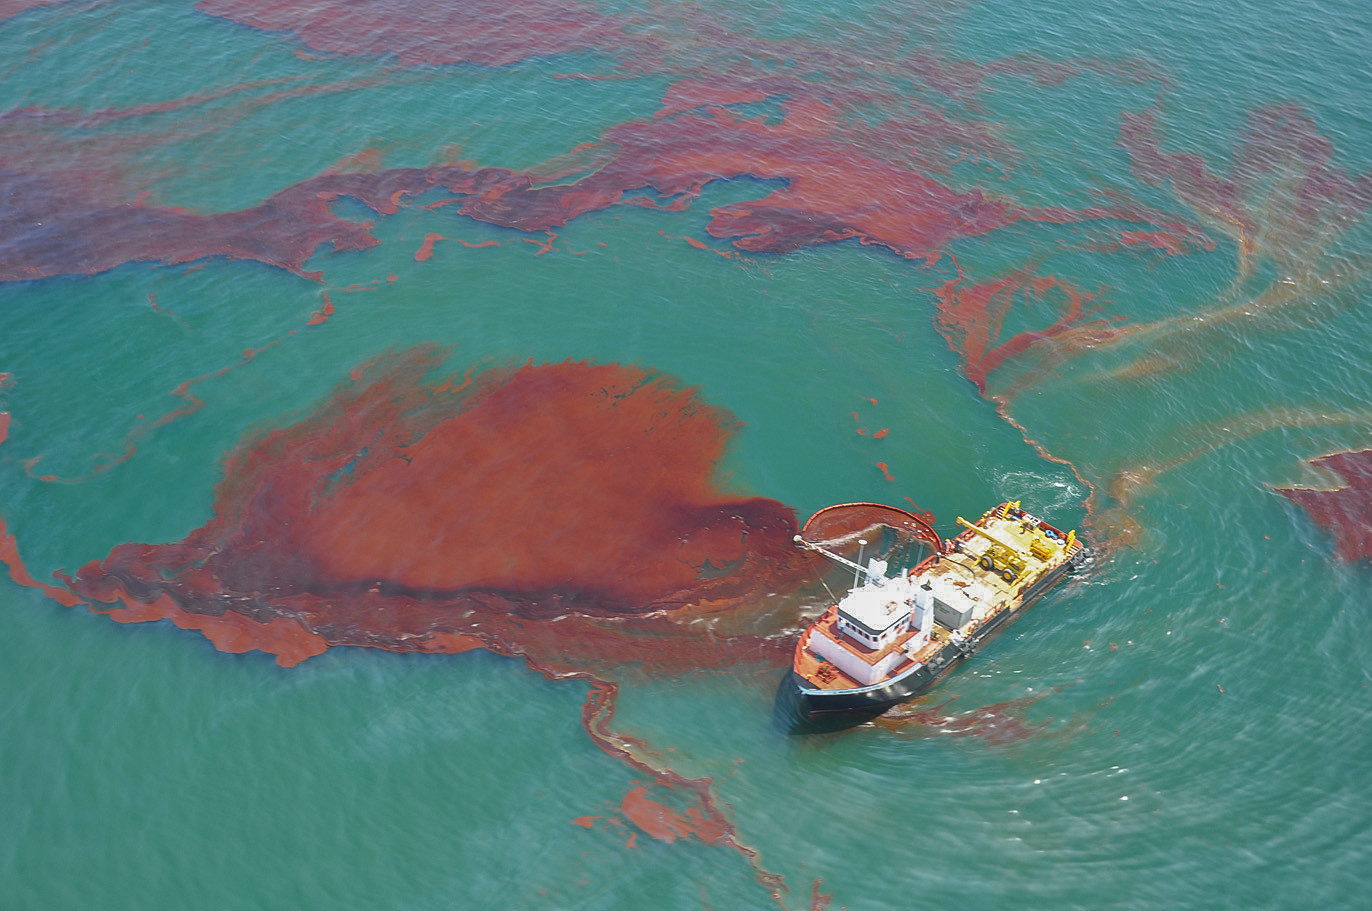 A skiff cleans up oil from the Deepwater Horizon oil spill in the Gulf of Mexico